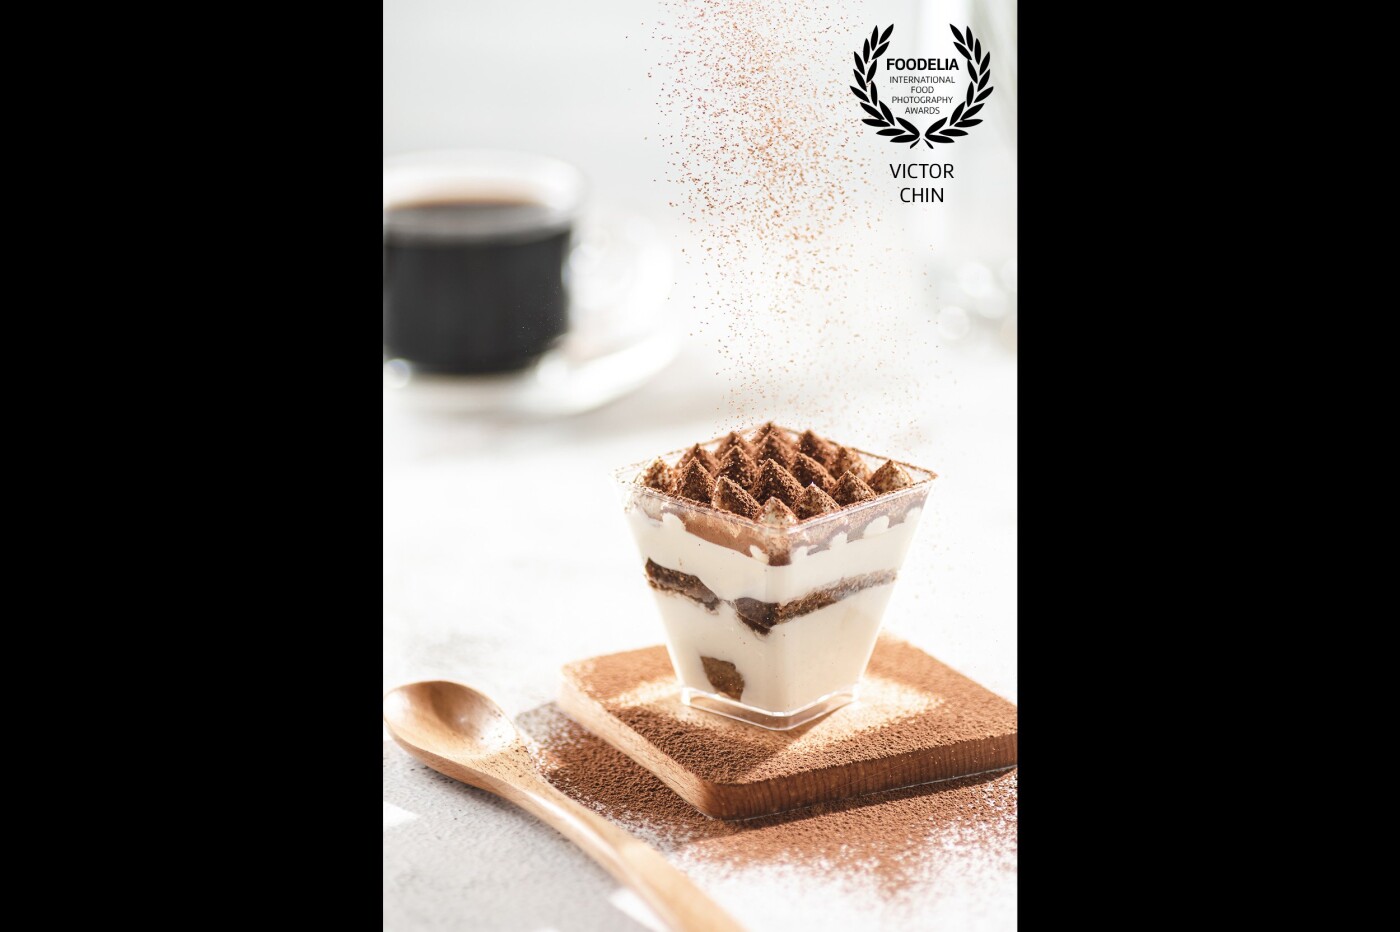 Shot this DIY Tiramisu for cake ingredient manufacturer. All the ingredients and tutorial comes in a package to ensure a smooth DIY process. 